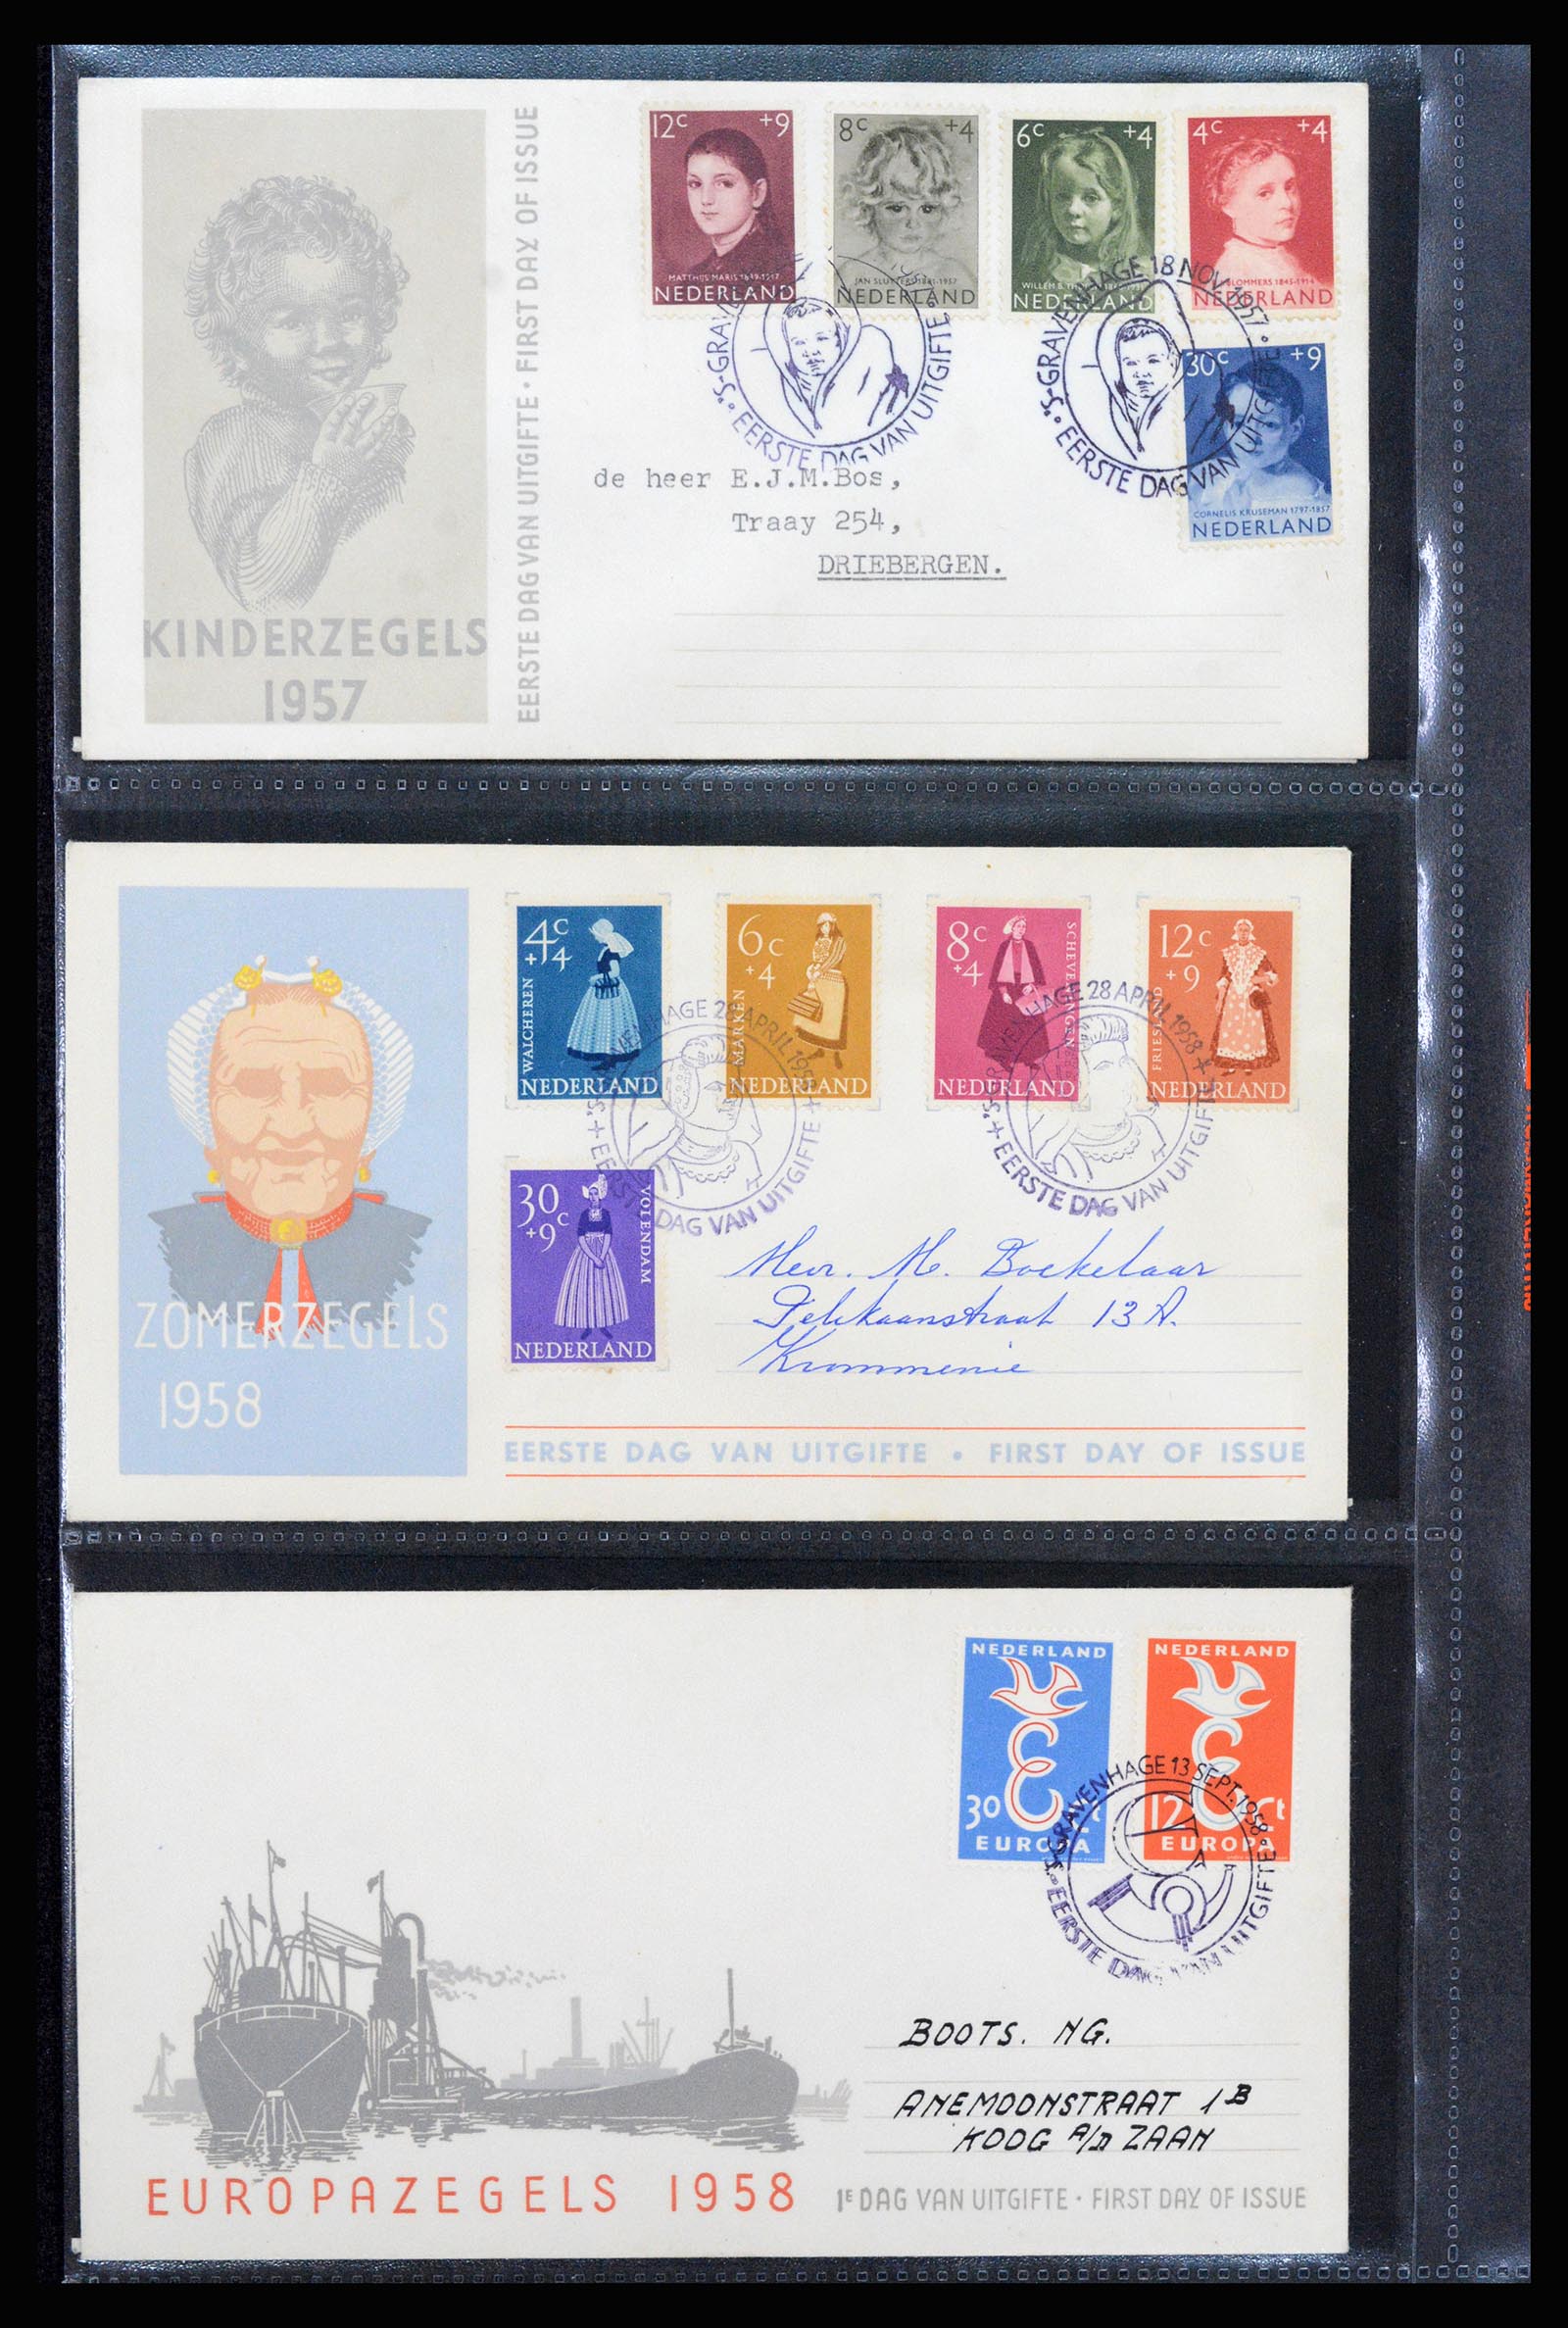 37264 012 - Stamp collection 37264 Netherlands FDC's 1950-1975.